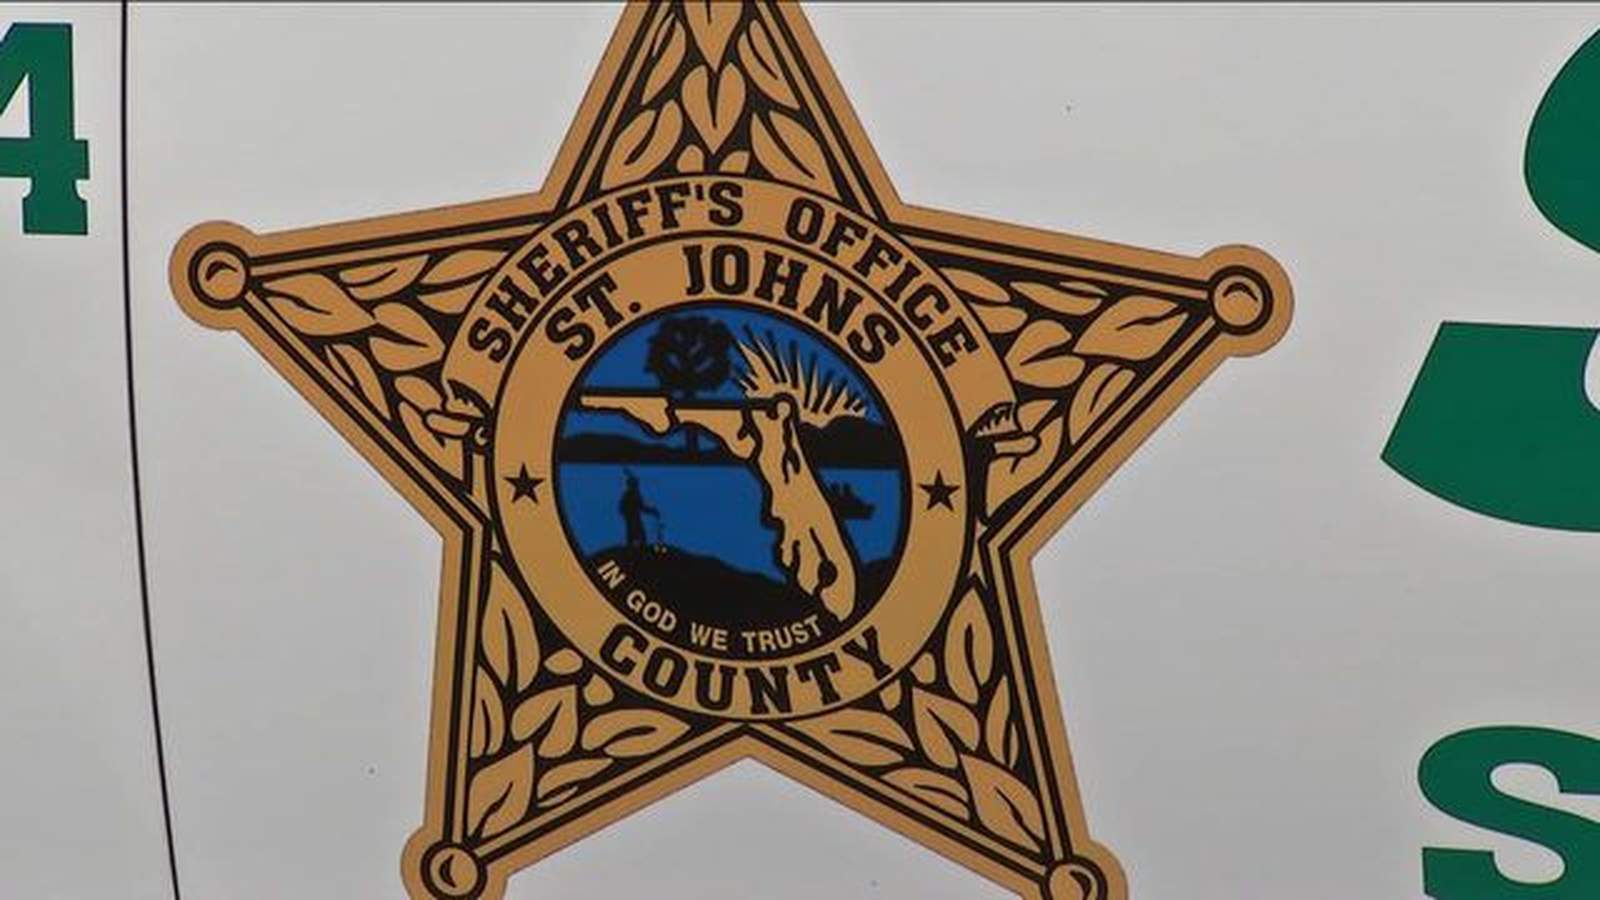 LIVE: St. Johns County Sheriff’s Office holds news conference on deadly double shooting